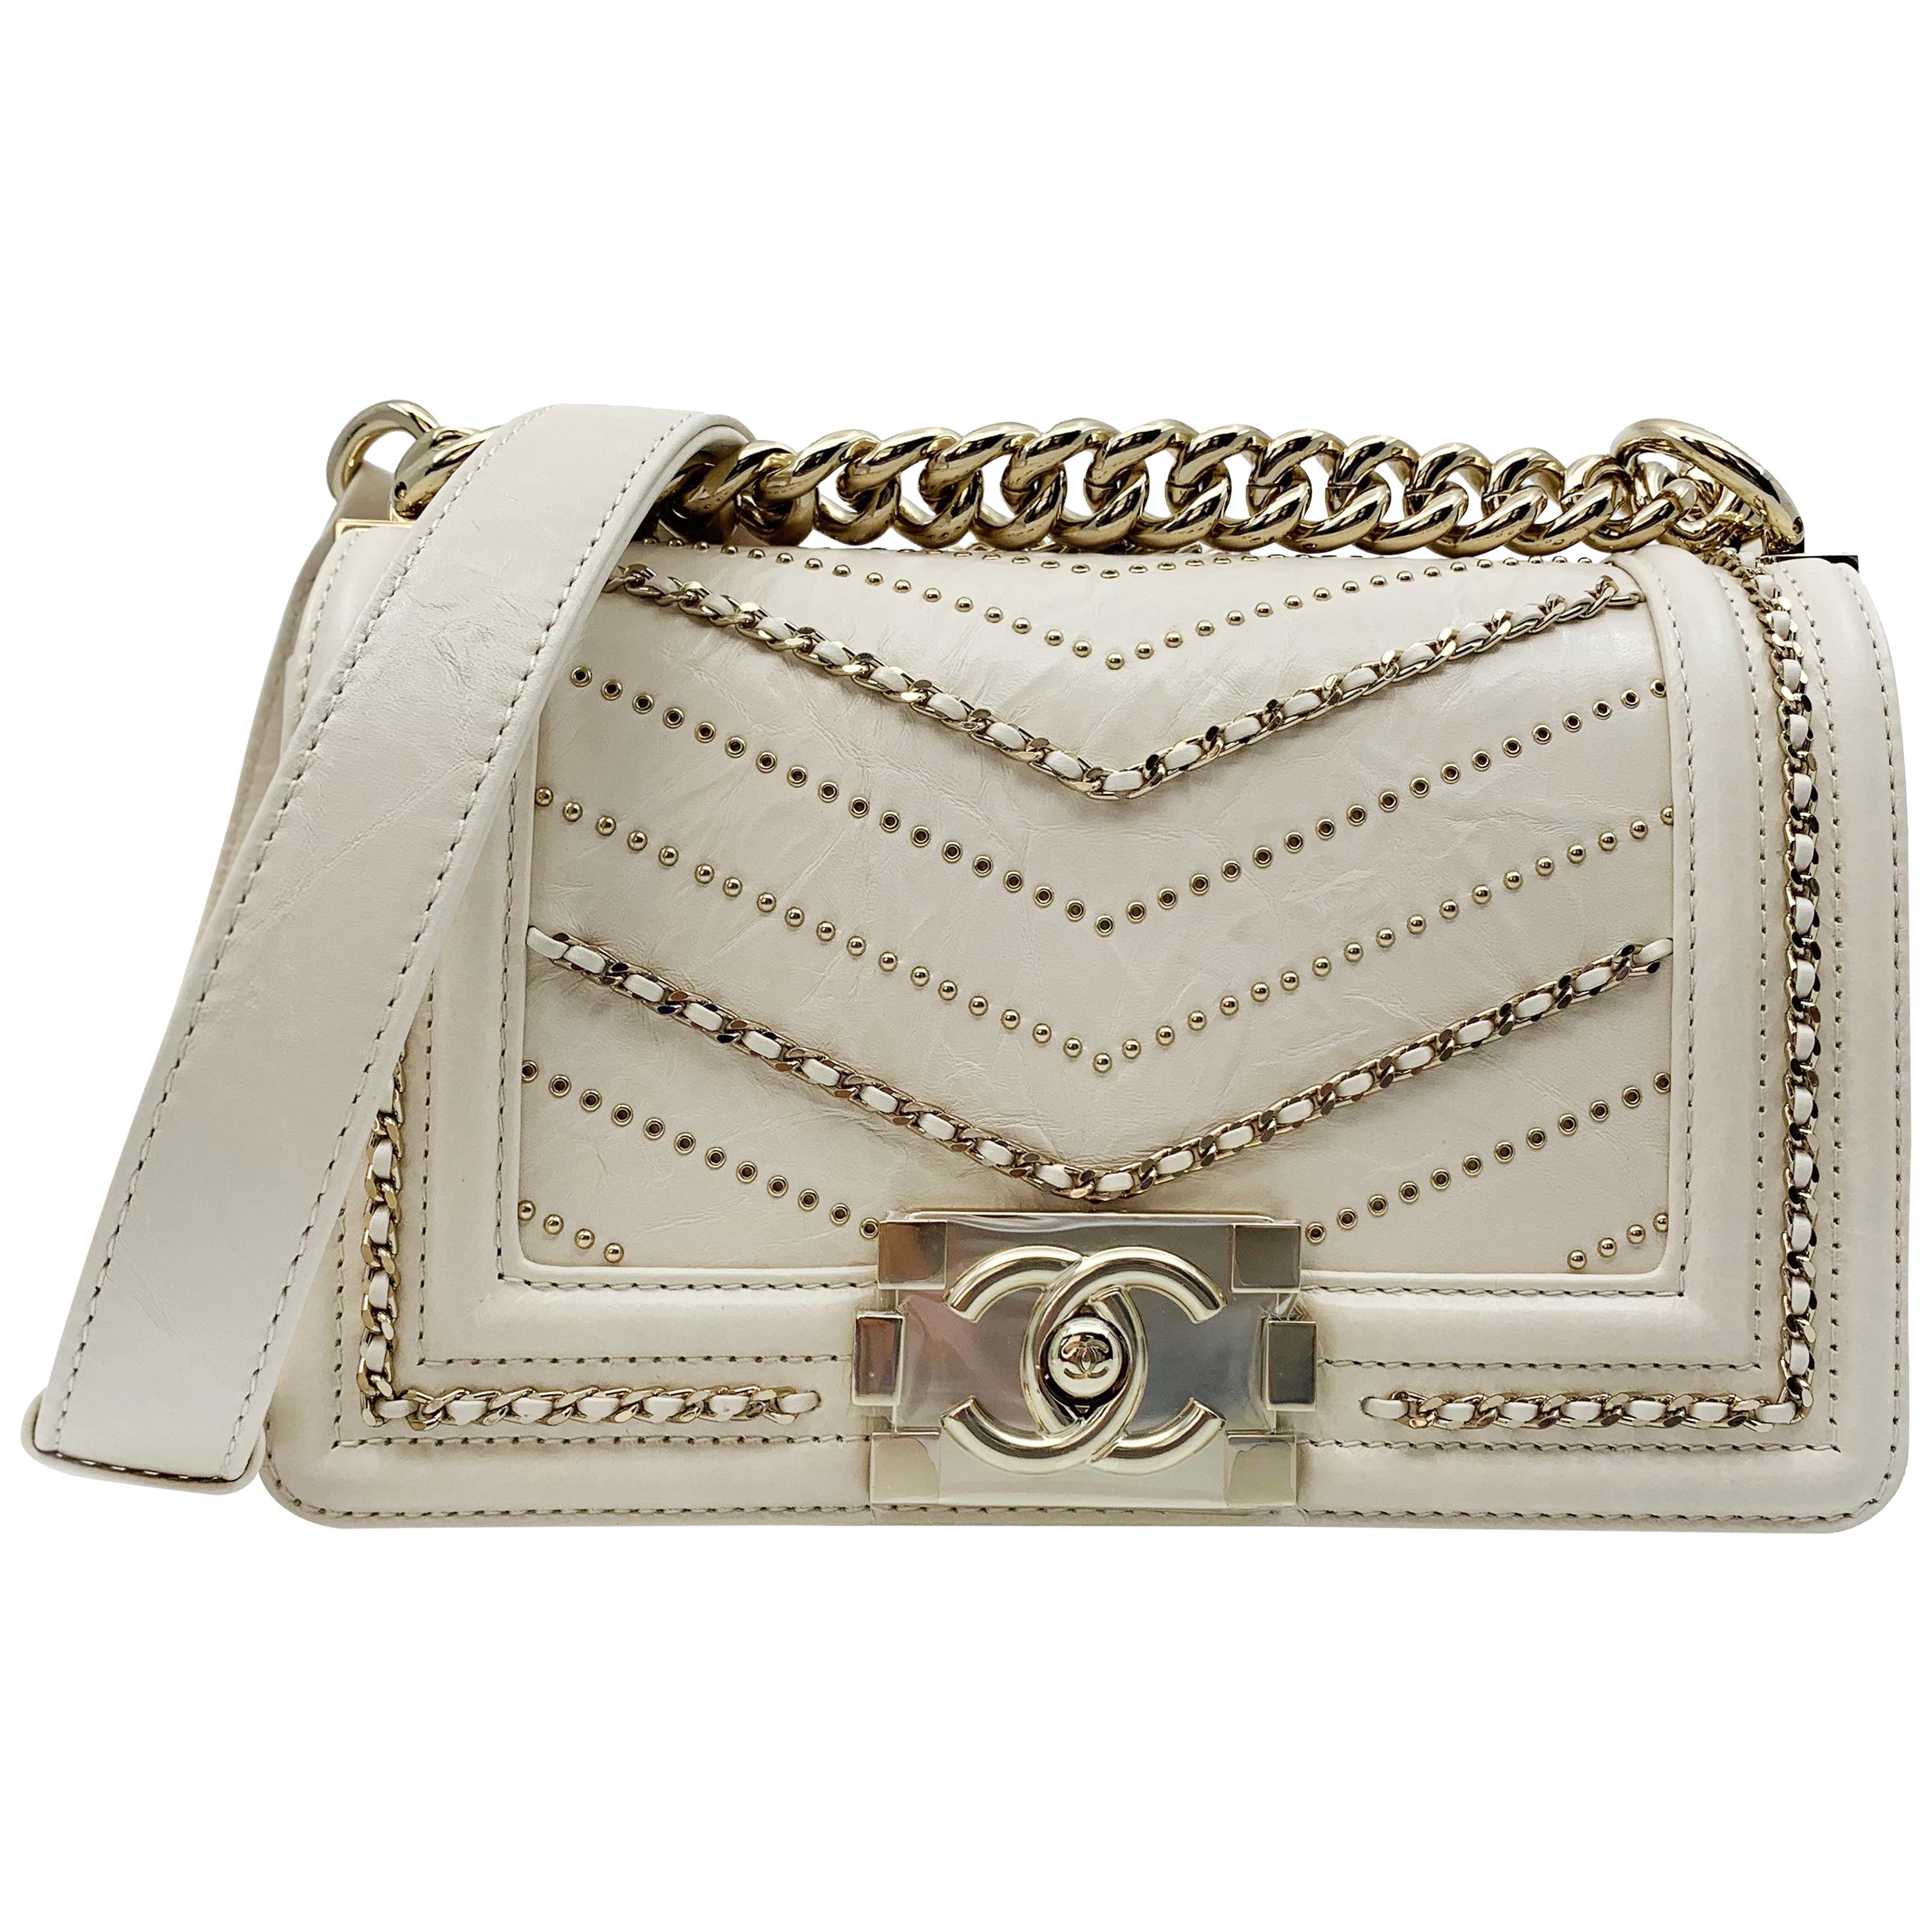 Chanel Crumpled Calfskin Small Boy Bag Ivory 2018 Collection A67085 Y83967 10800